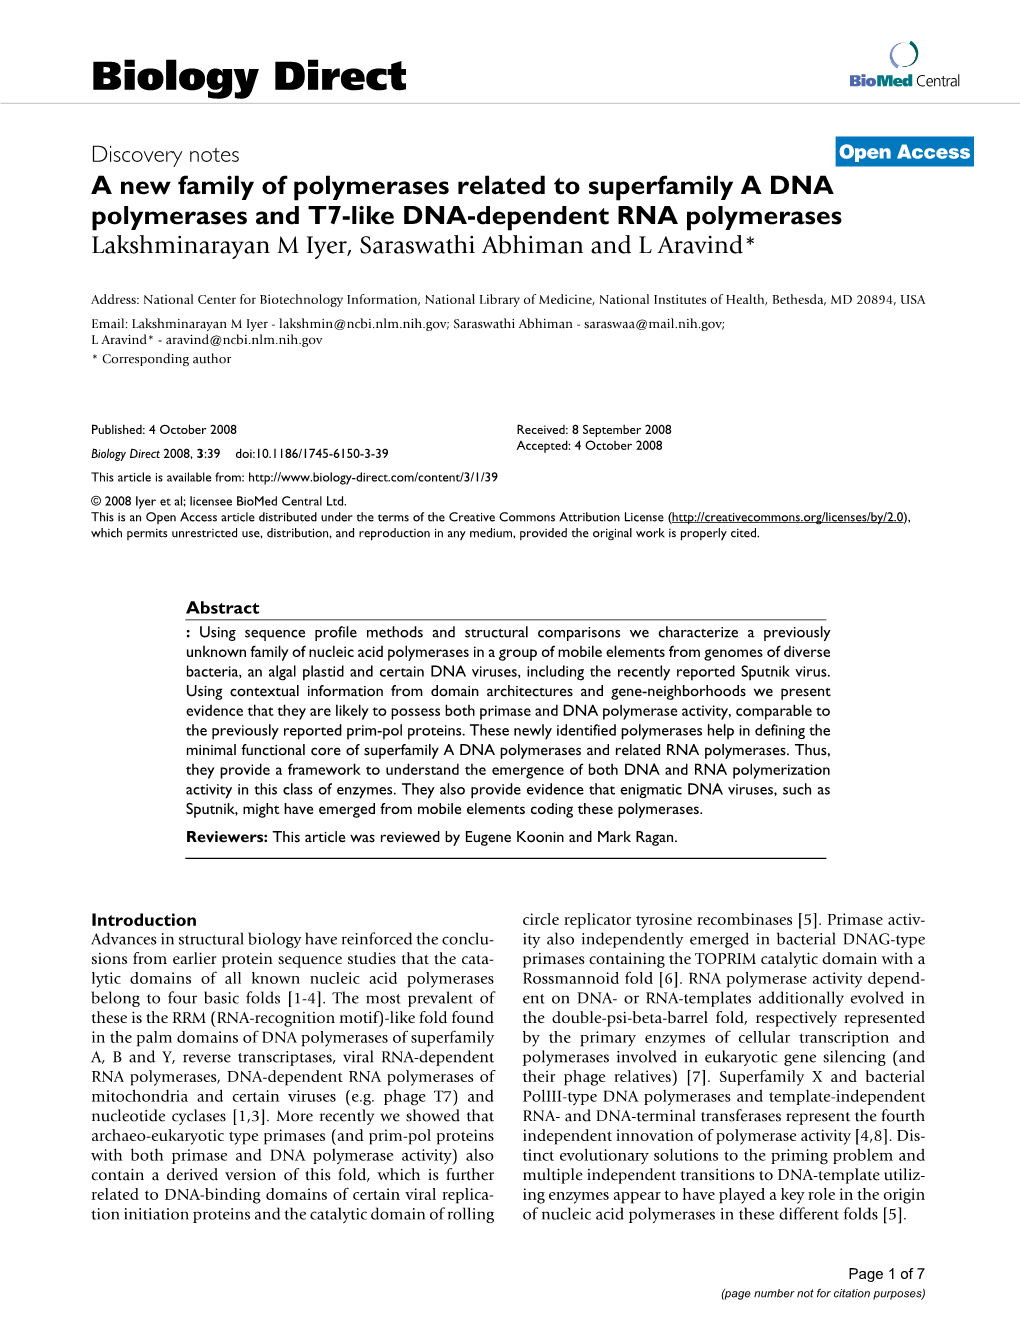 A New Family of Polymerases Related to Superfamily a DNA Polymerases and T7-Like DNA-Dependent RNA Polymerases